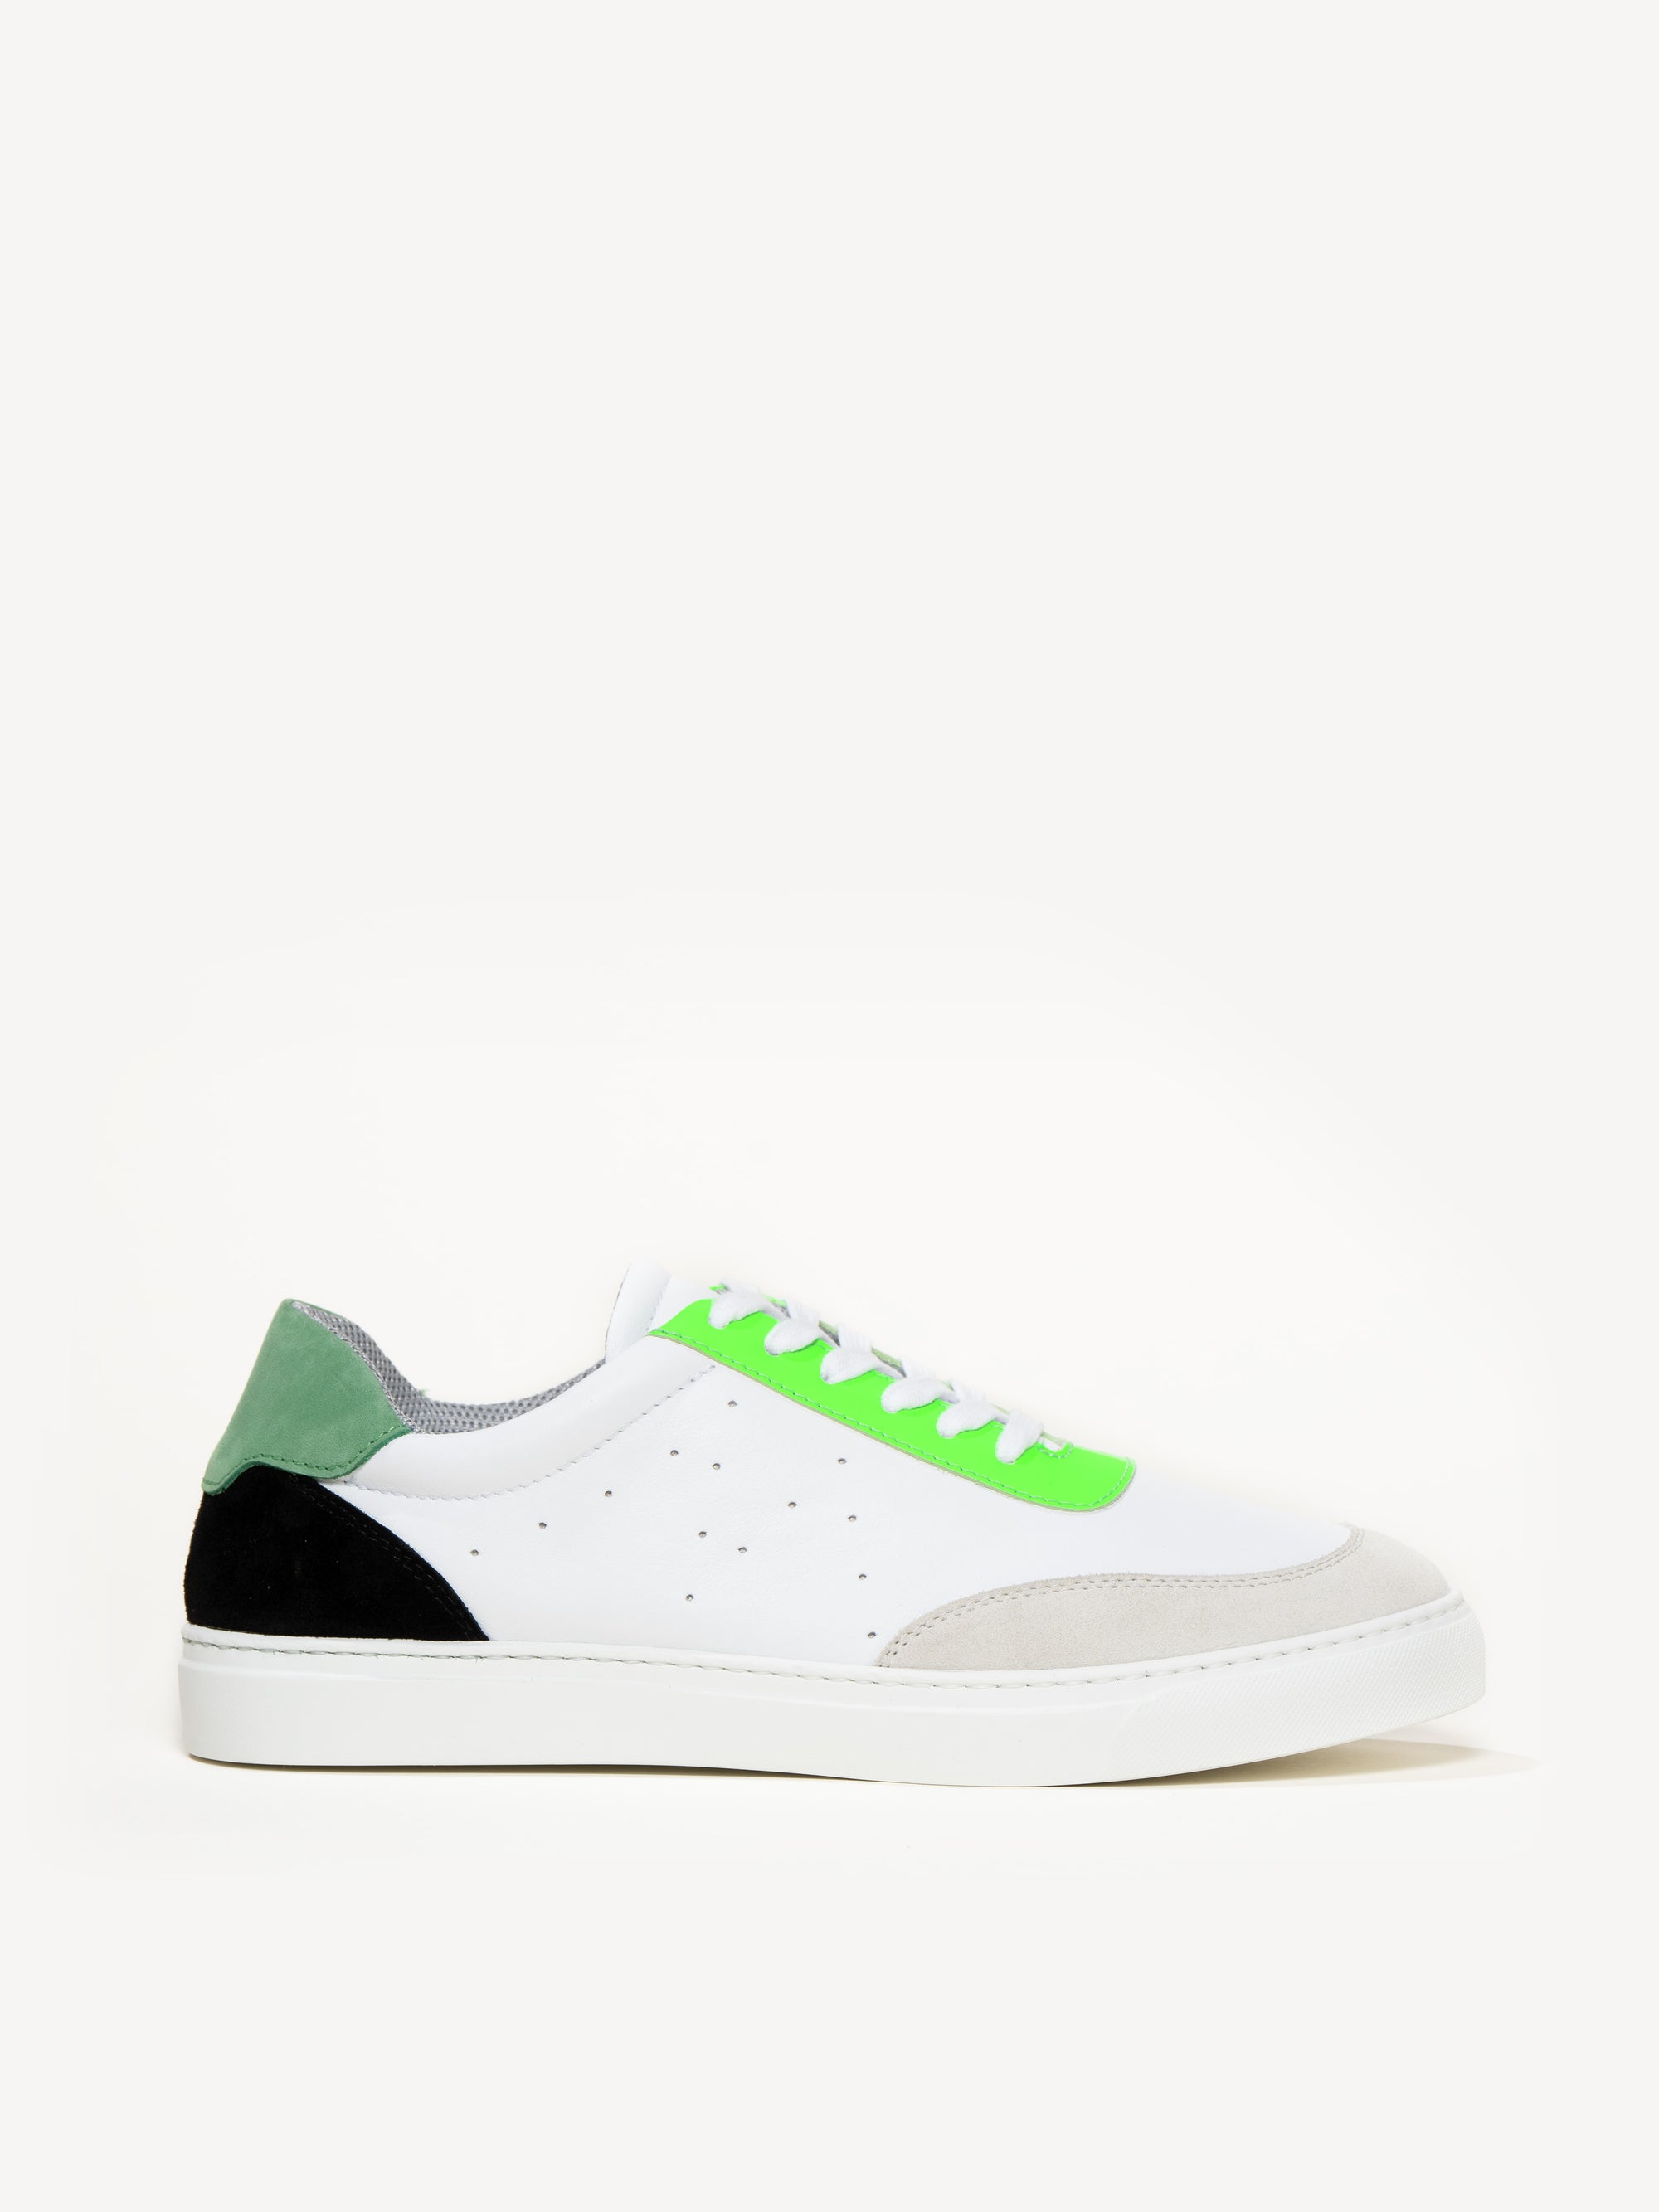 The Paolo - Green and Black Multi - Leather and Suede - M.Gemi